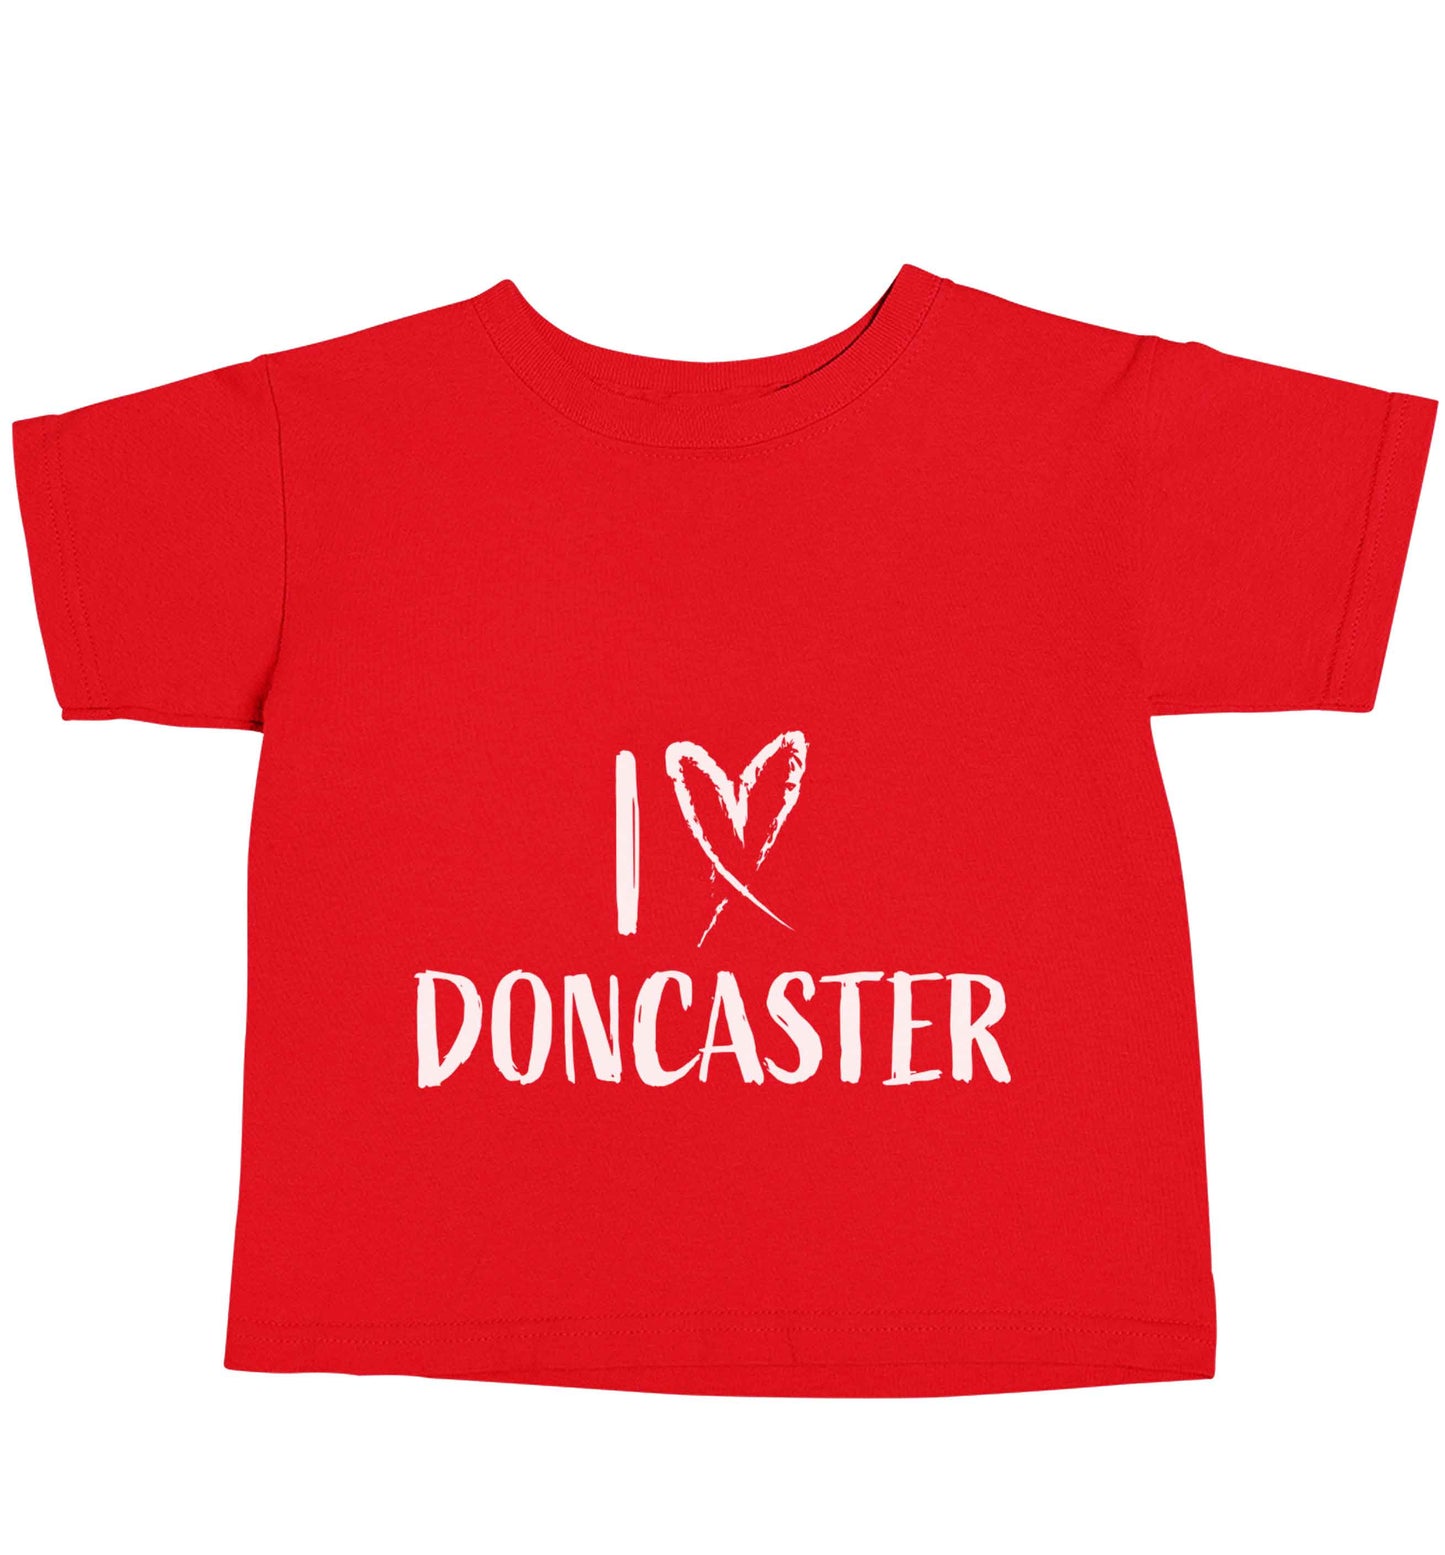 I love Doncaster red baby toddler Tshirt 2 Years